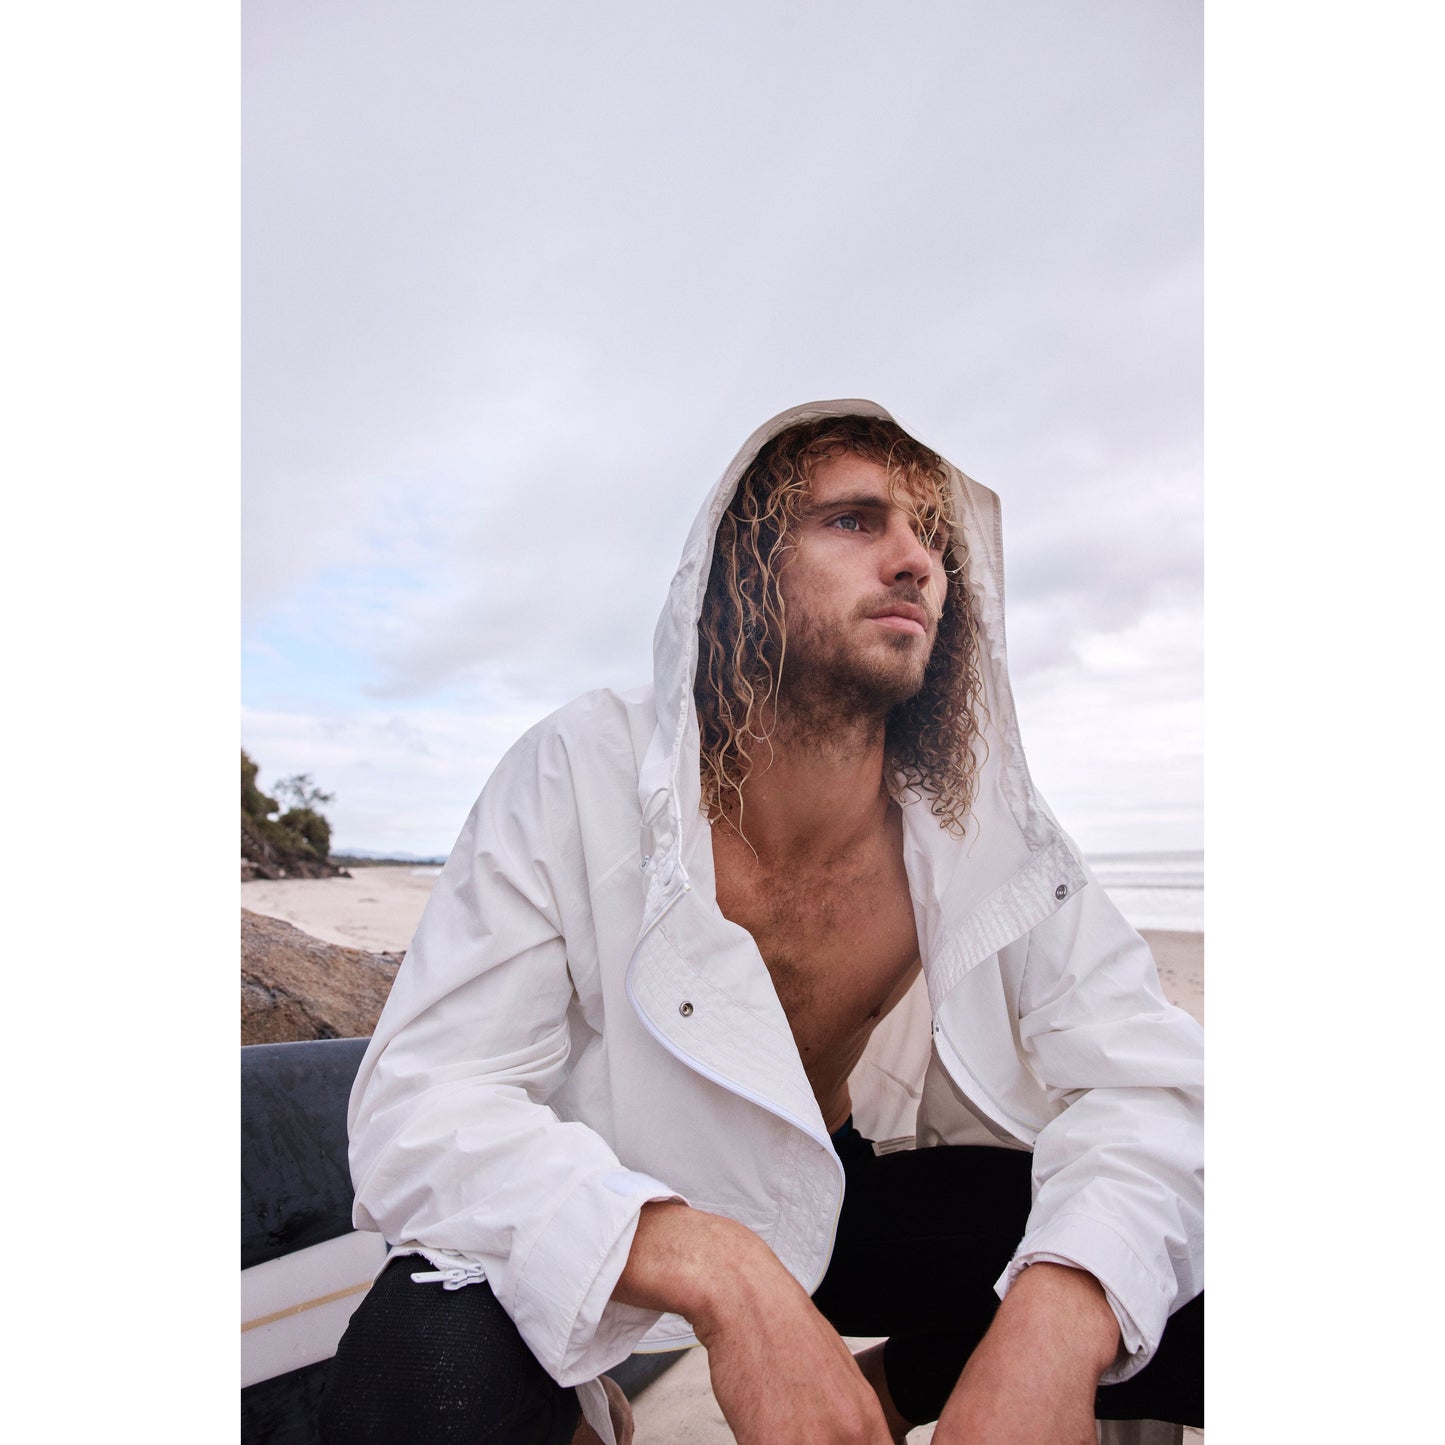 Man with curly hair wearing a Free People Movement Singin in the Rain Jacket in Painted White with hood, sitting on a beach on an overcast day, looking thoughtfully into the distance.